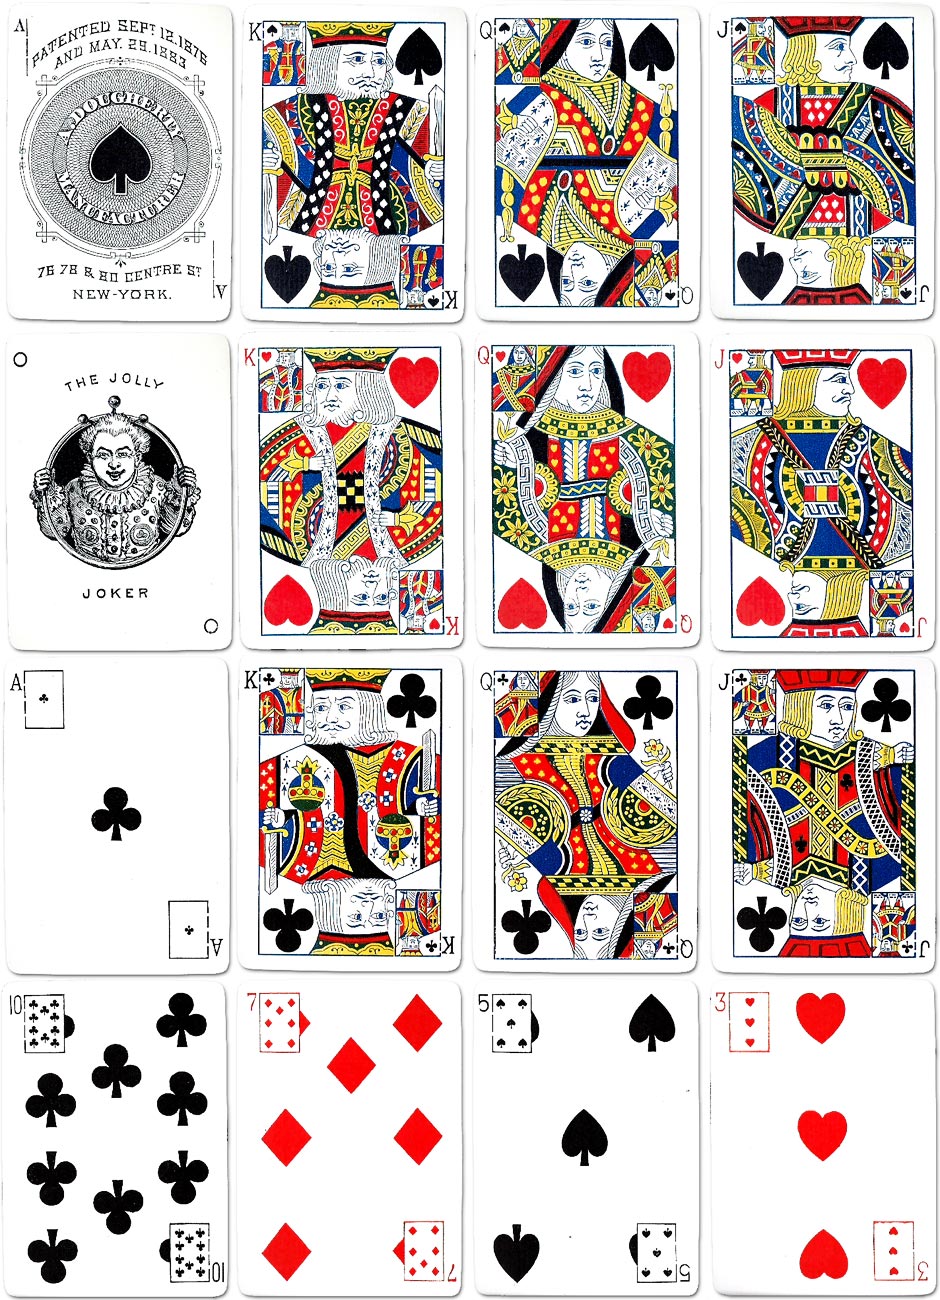  Dougherty's “Ivorette No.70” deck has the “Indicator” Ace of Spades and a Jolly Joker